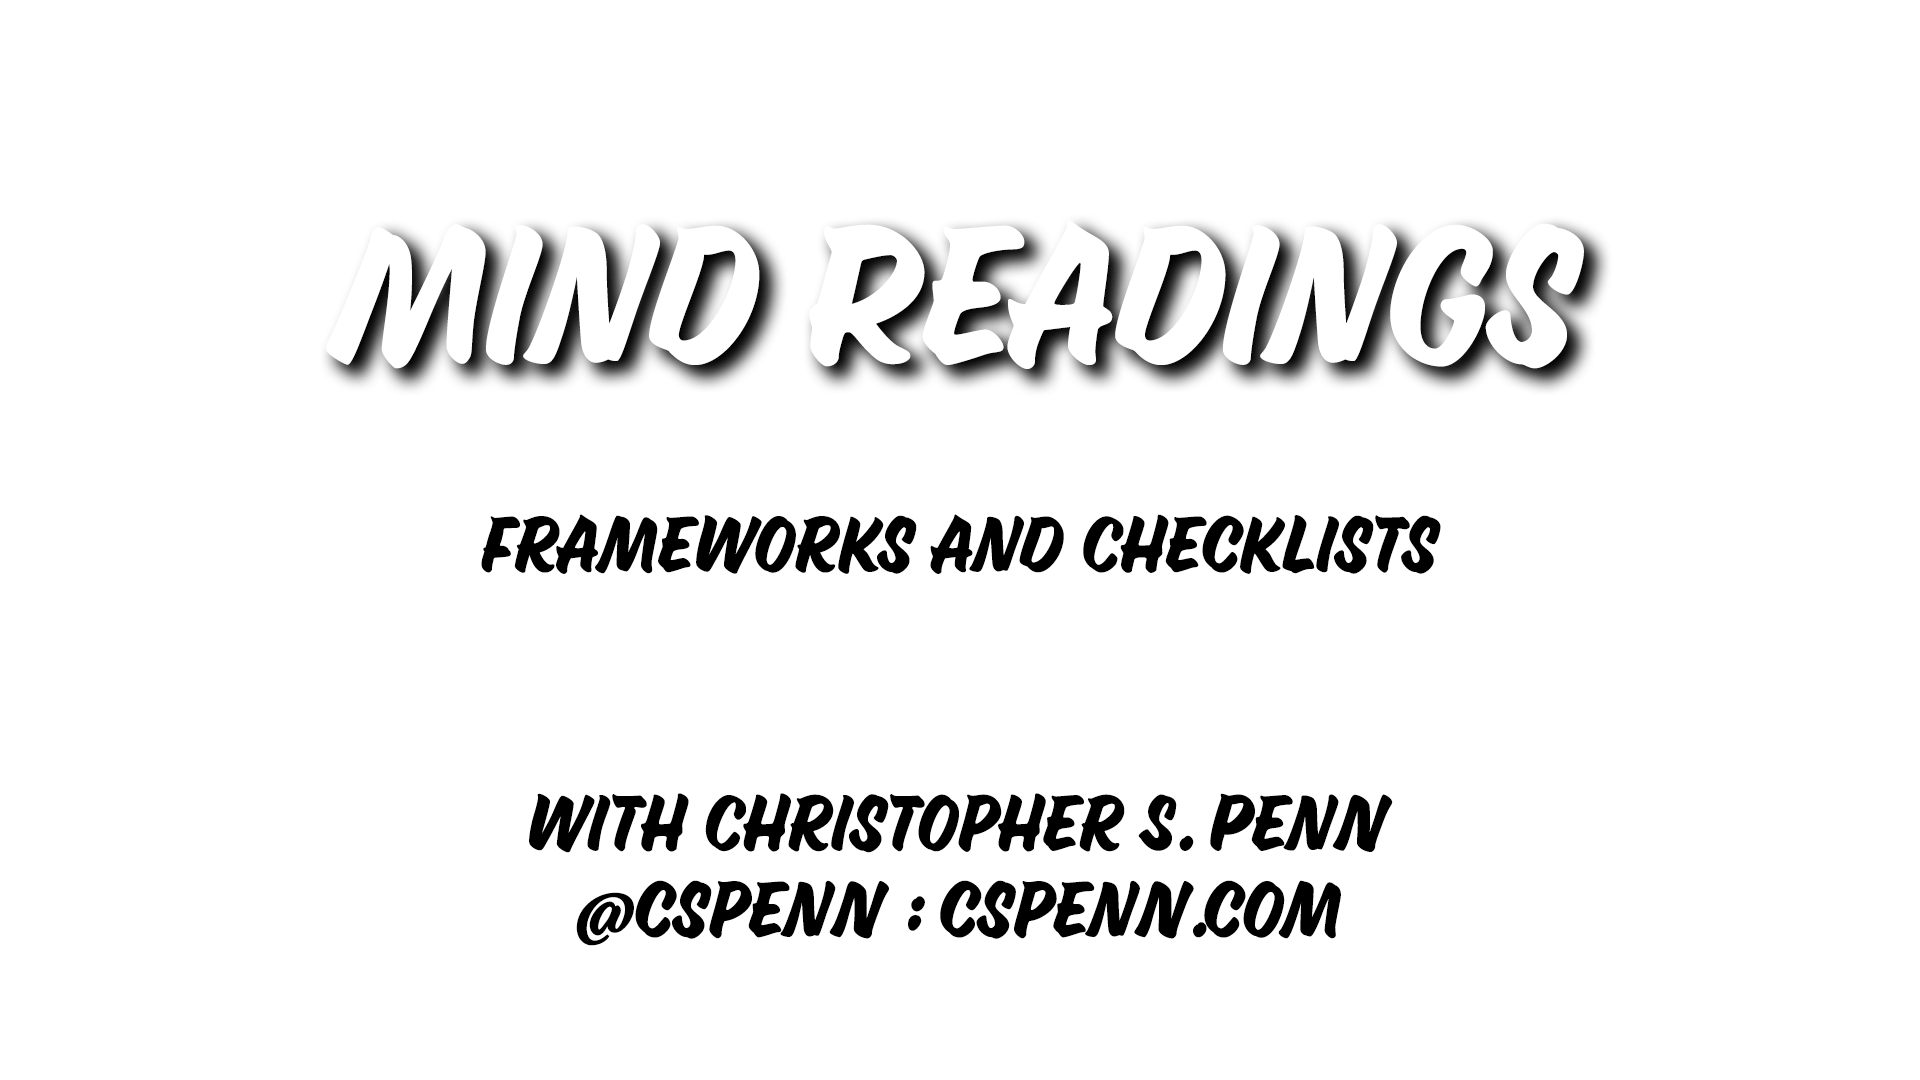 Mind Readings: Frameworks and Checklists